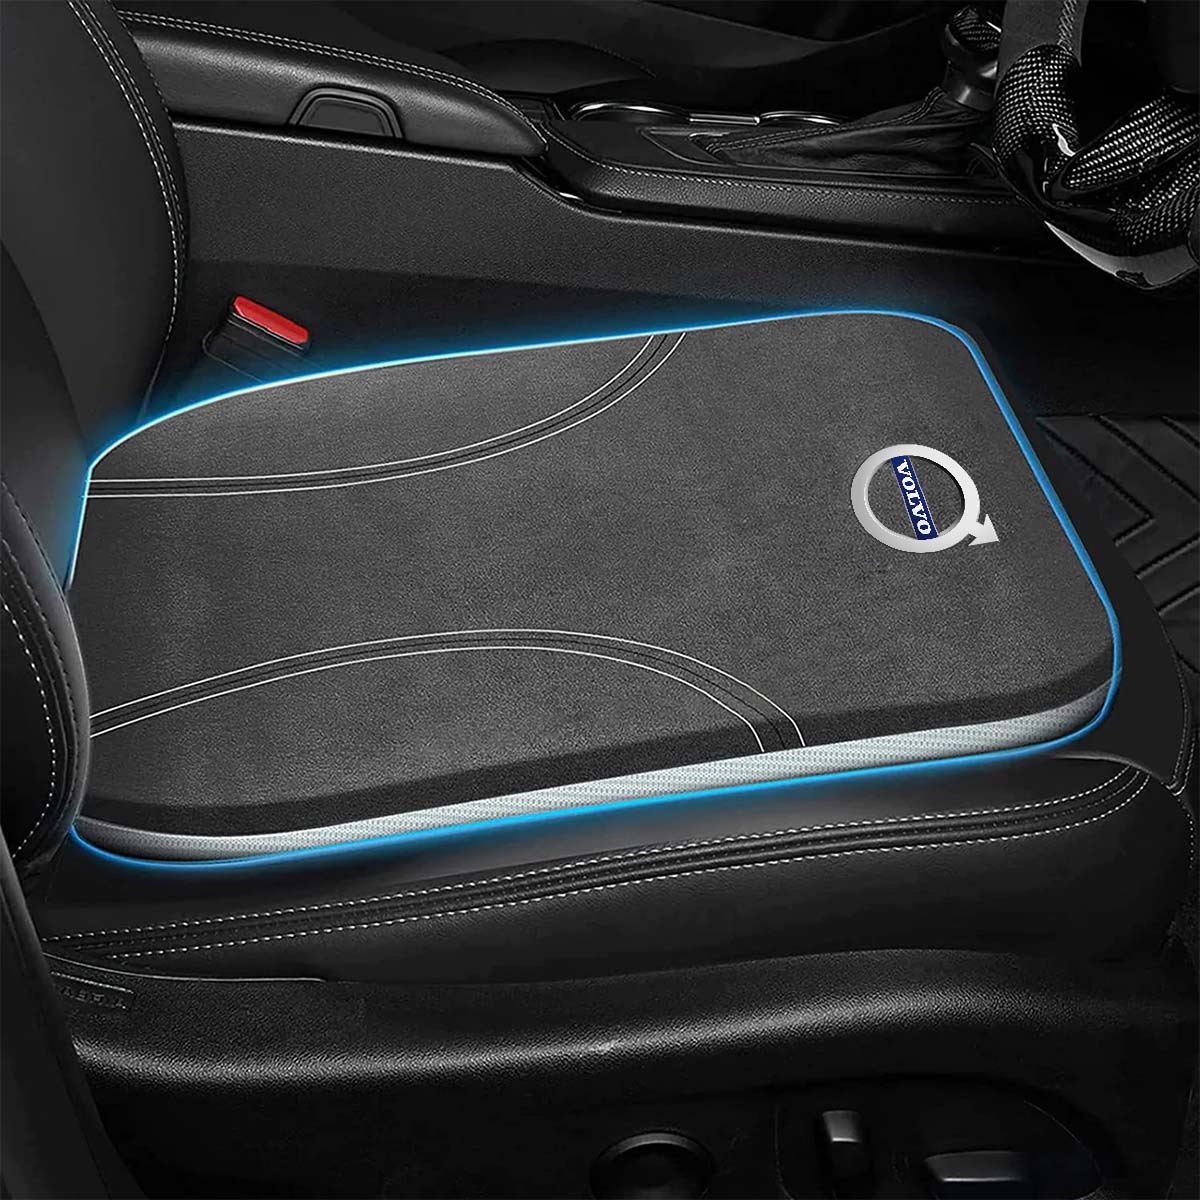 Volvo Car Seat Cushion: Enhance Comfort and Support for Your Drive